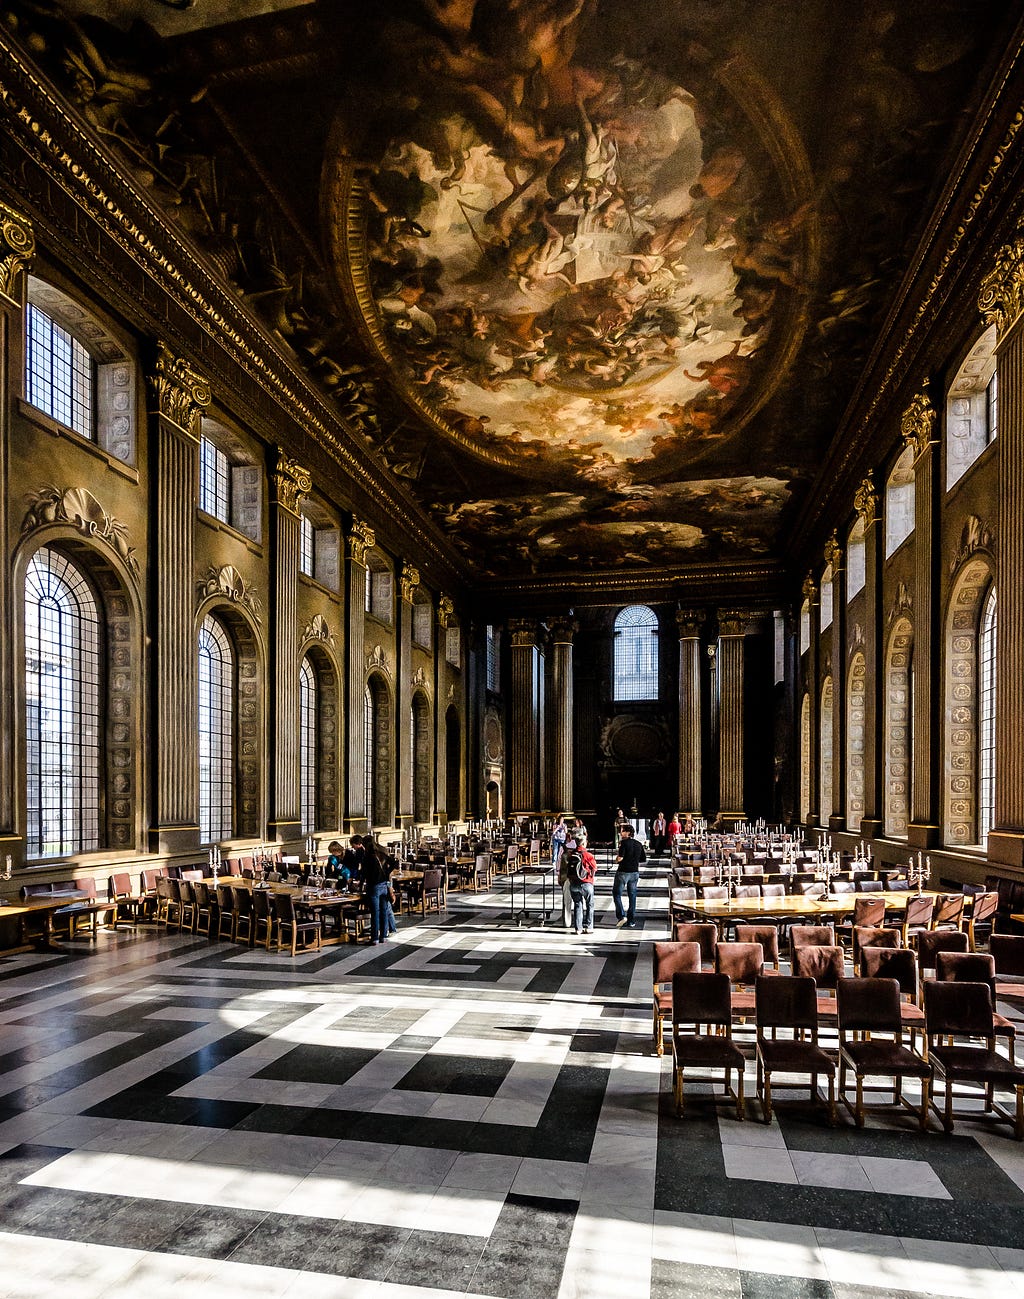 Painted Hall Photo Spot at the Royal Naval College in London, England